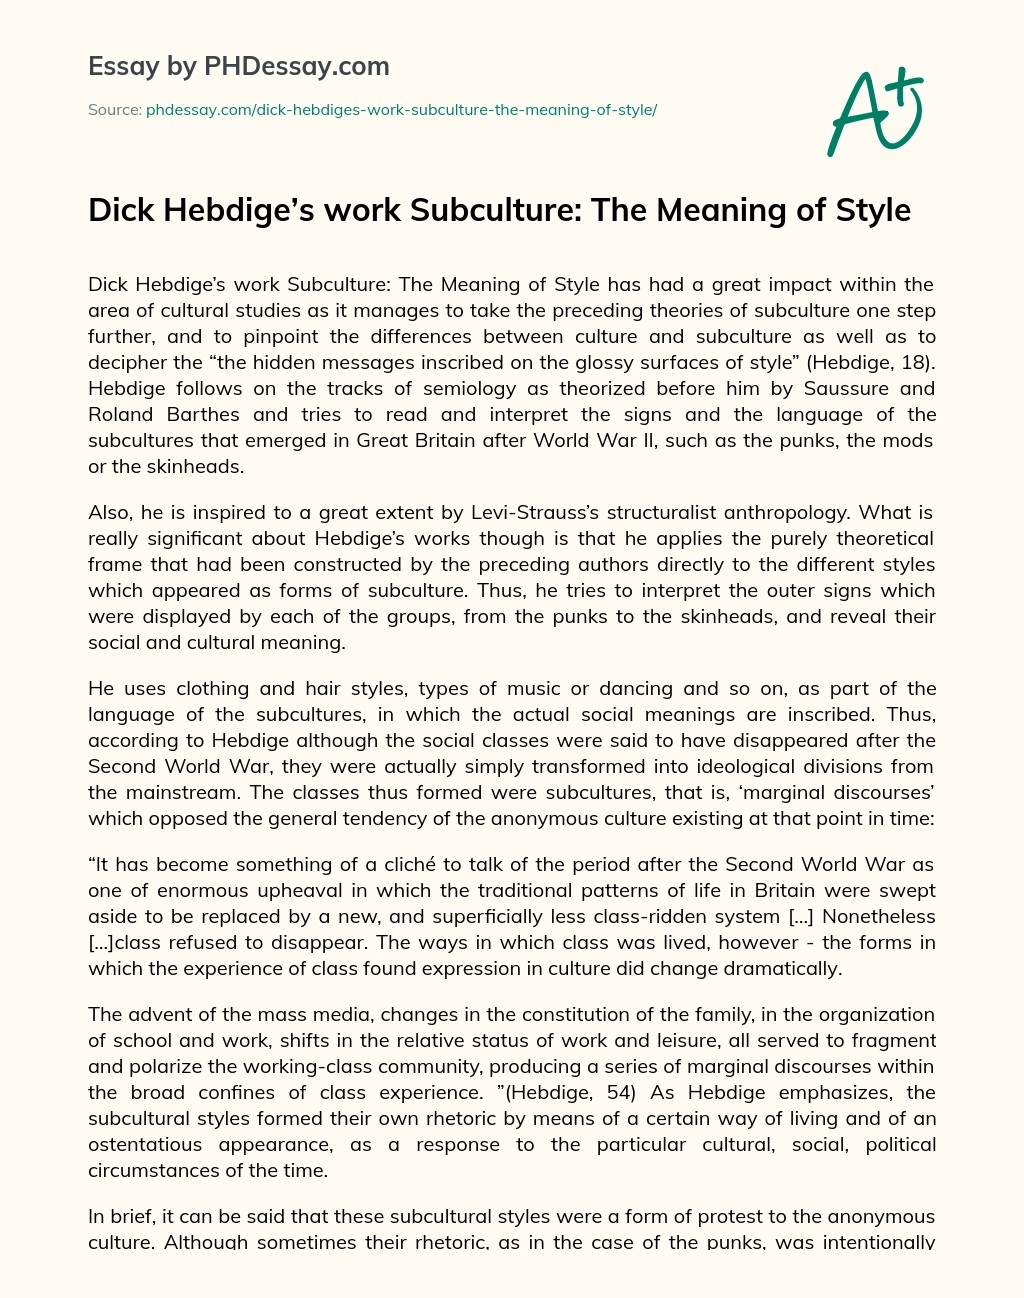 Dick Hebdige’s work Subculture: The Meaning of Style essay